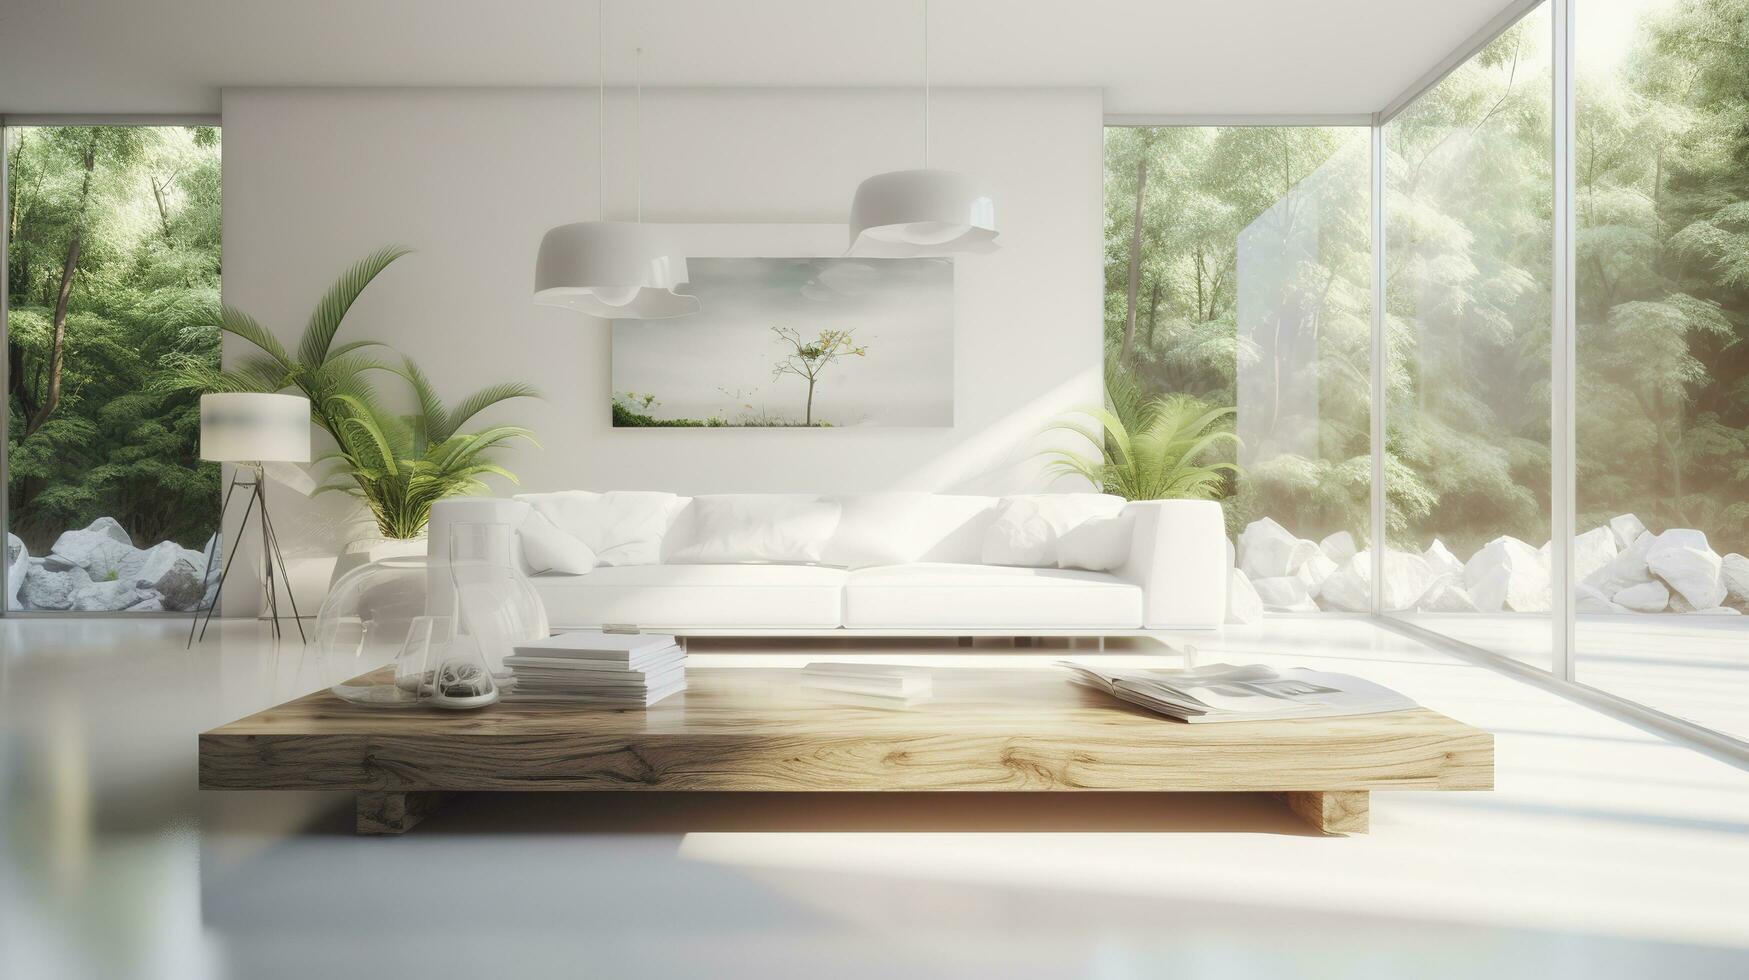 a futuristic white minimal interior of a living room, luxurious interior, extra large sofa design, tropical plants, view overlooking the natural landscape, and modern swimming pool, generate ai photo